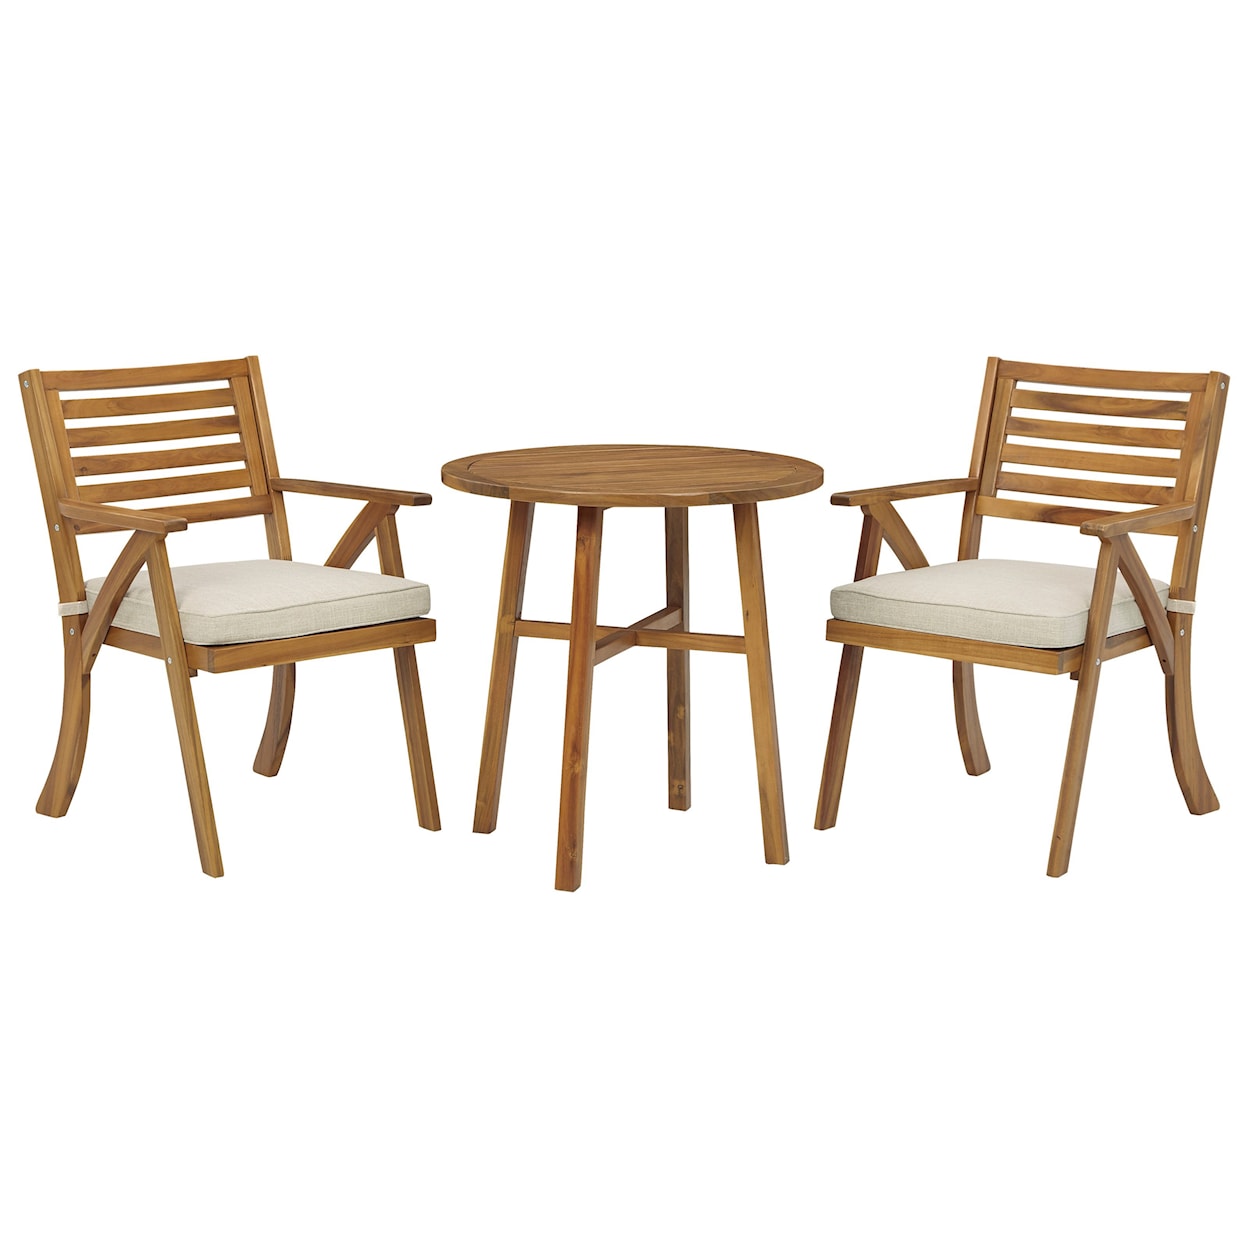 Ashley Furniture Signature Design Vallerie 3-Piece Table & Chairs with Cushion Set